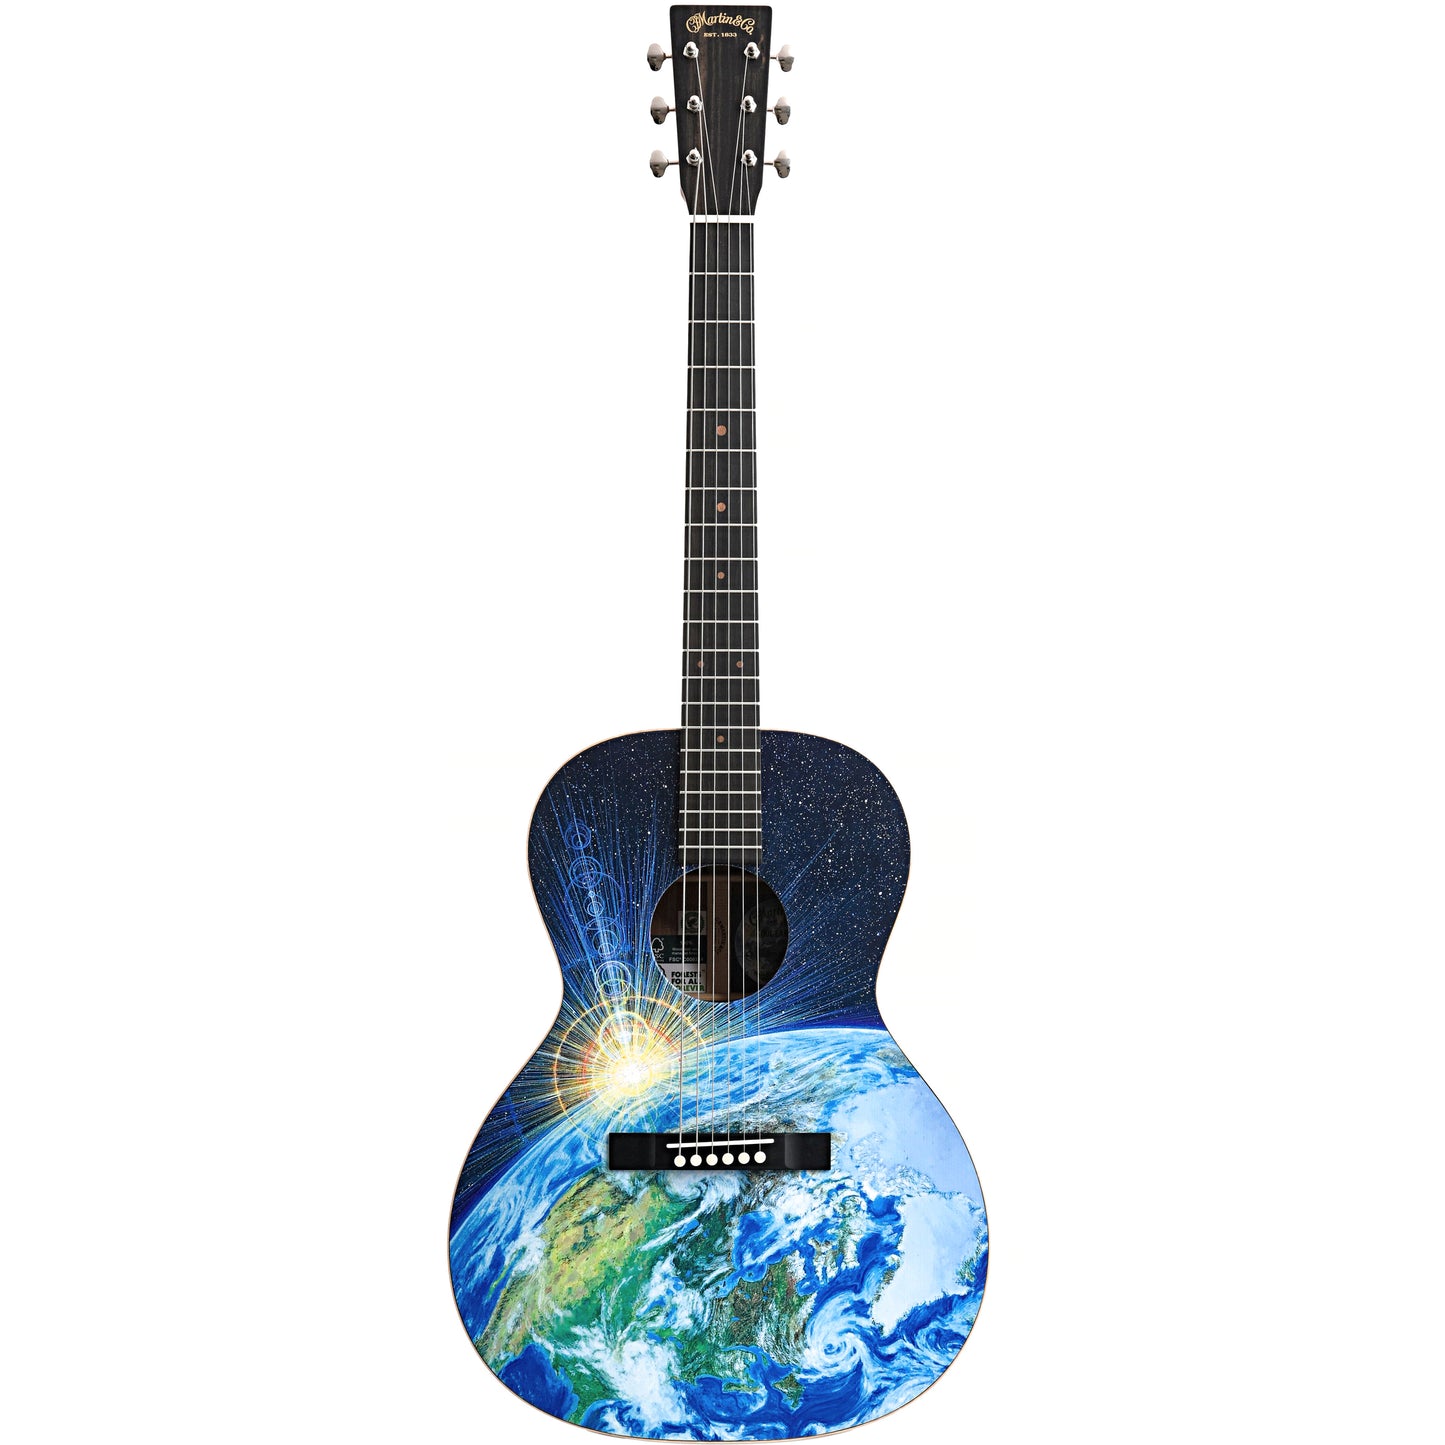 Full front of Martin 00L-17 Earth Guitar